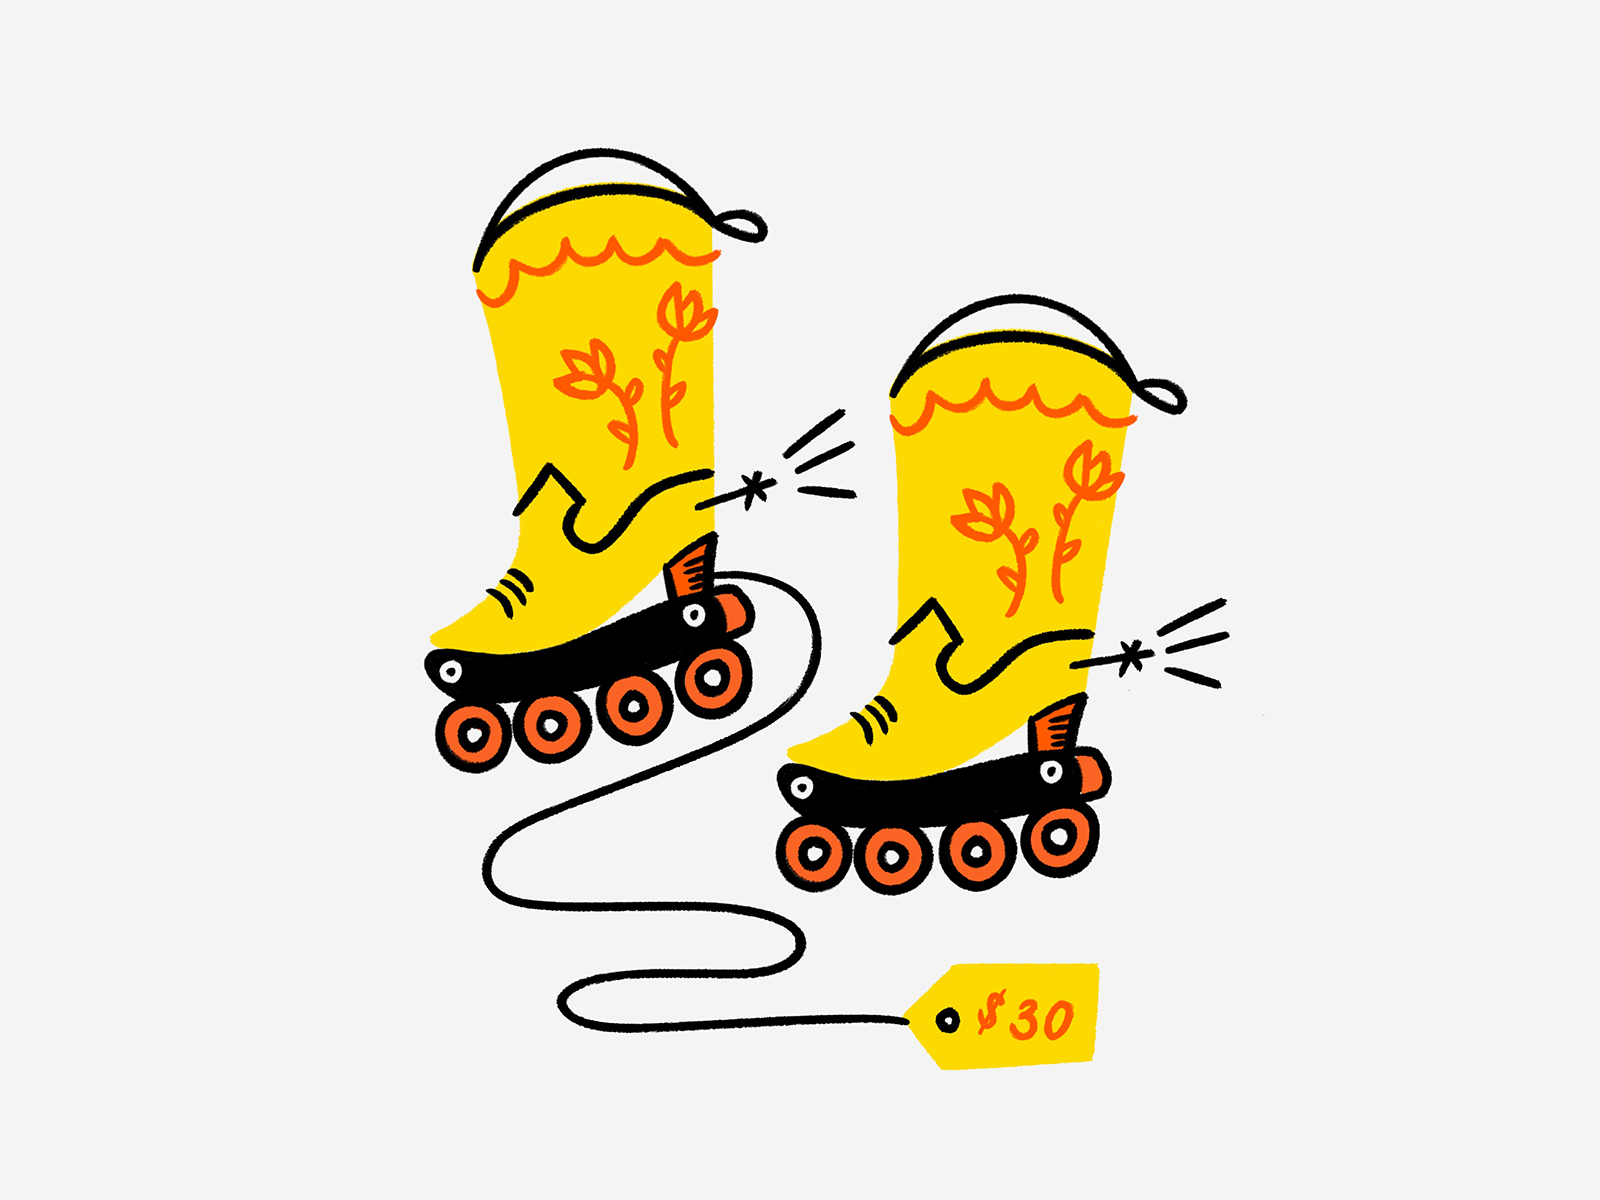 These boots were made for bladin’ 🛼🏄🏼♀️🤙 blades cowboy cowboy boots design doodle funny illo illustration lol meme procreate rollerblades sketch